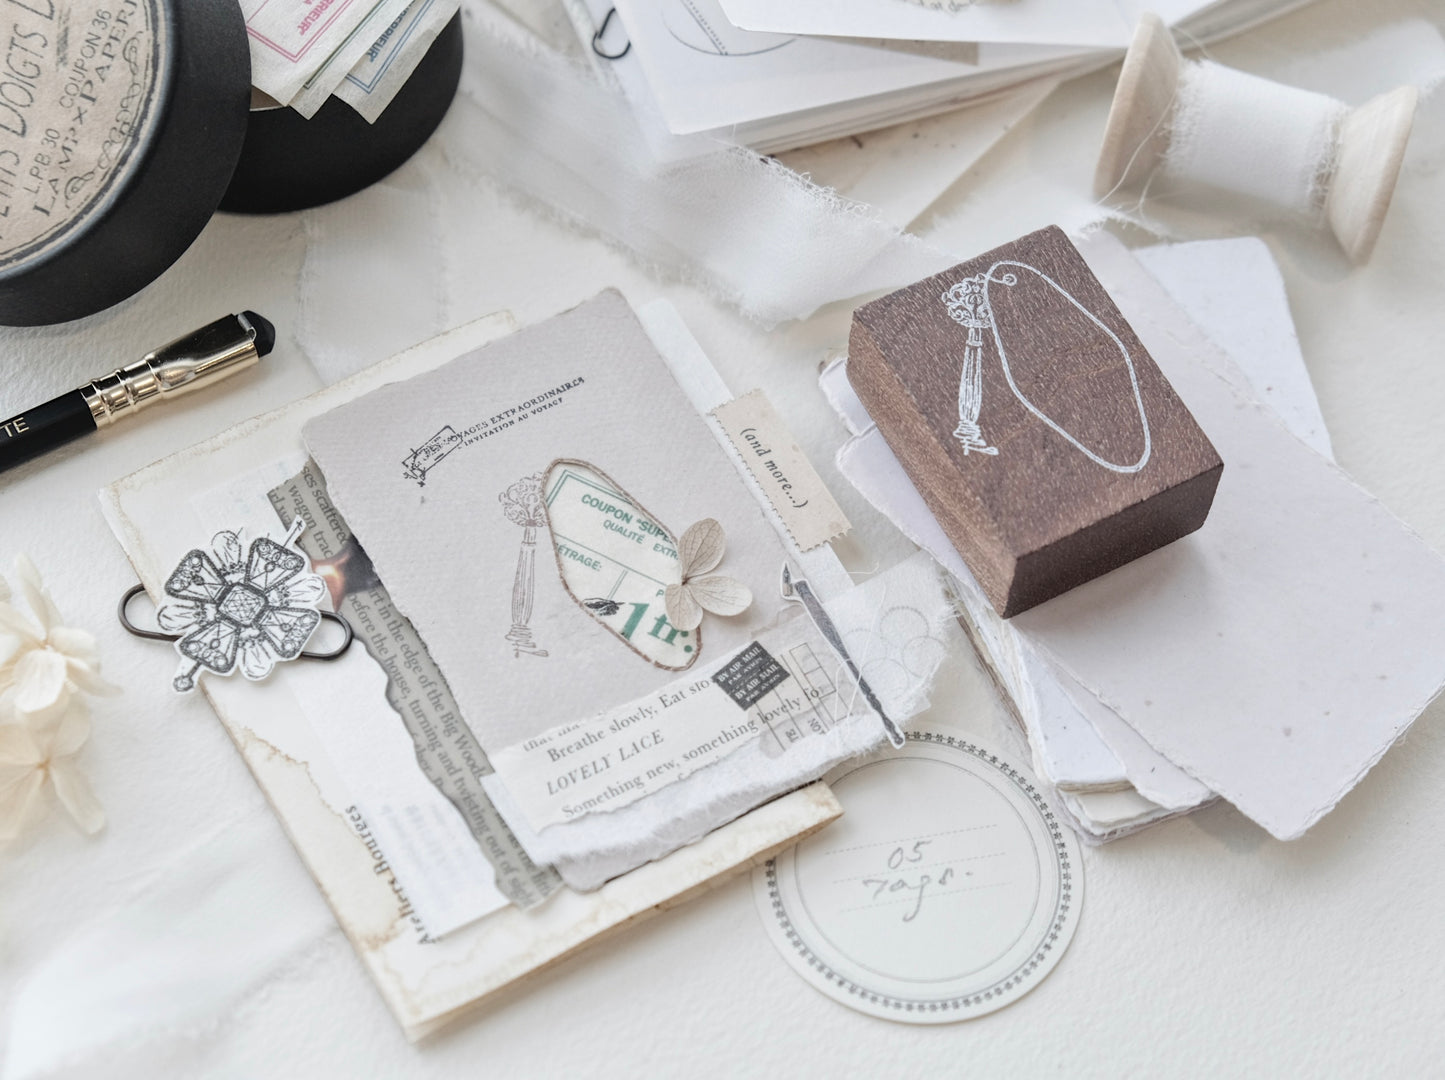 Jieyanow Atelier Rubber Stamp - Not Your Usual Tags, 5 designs